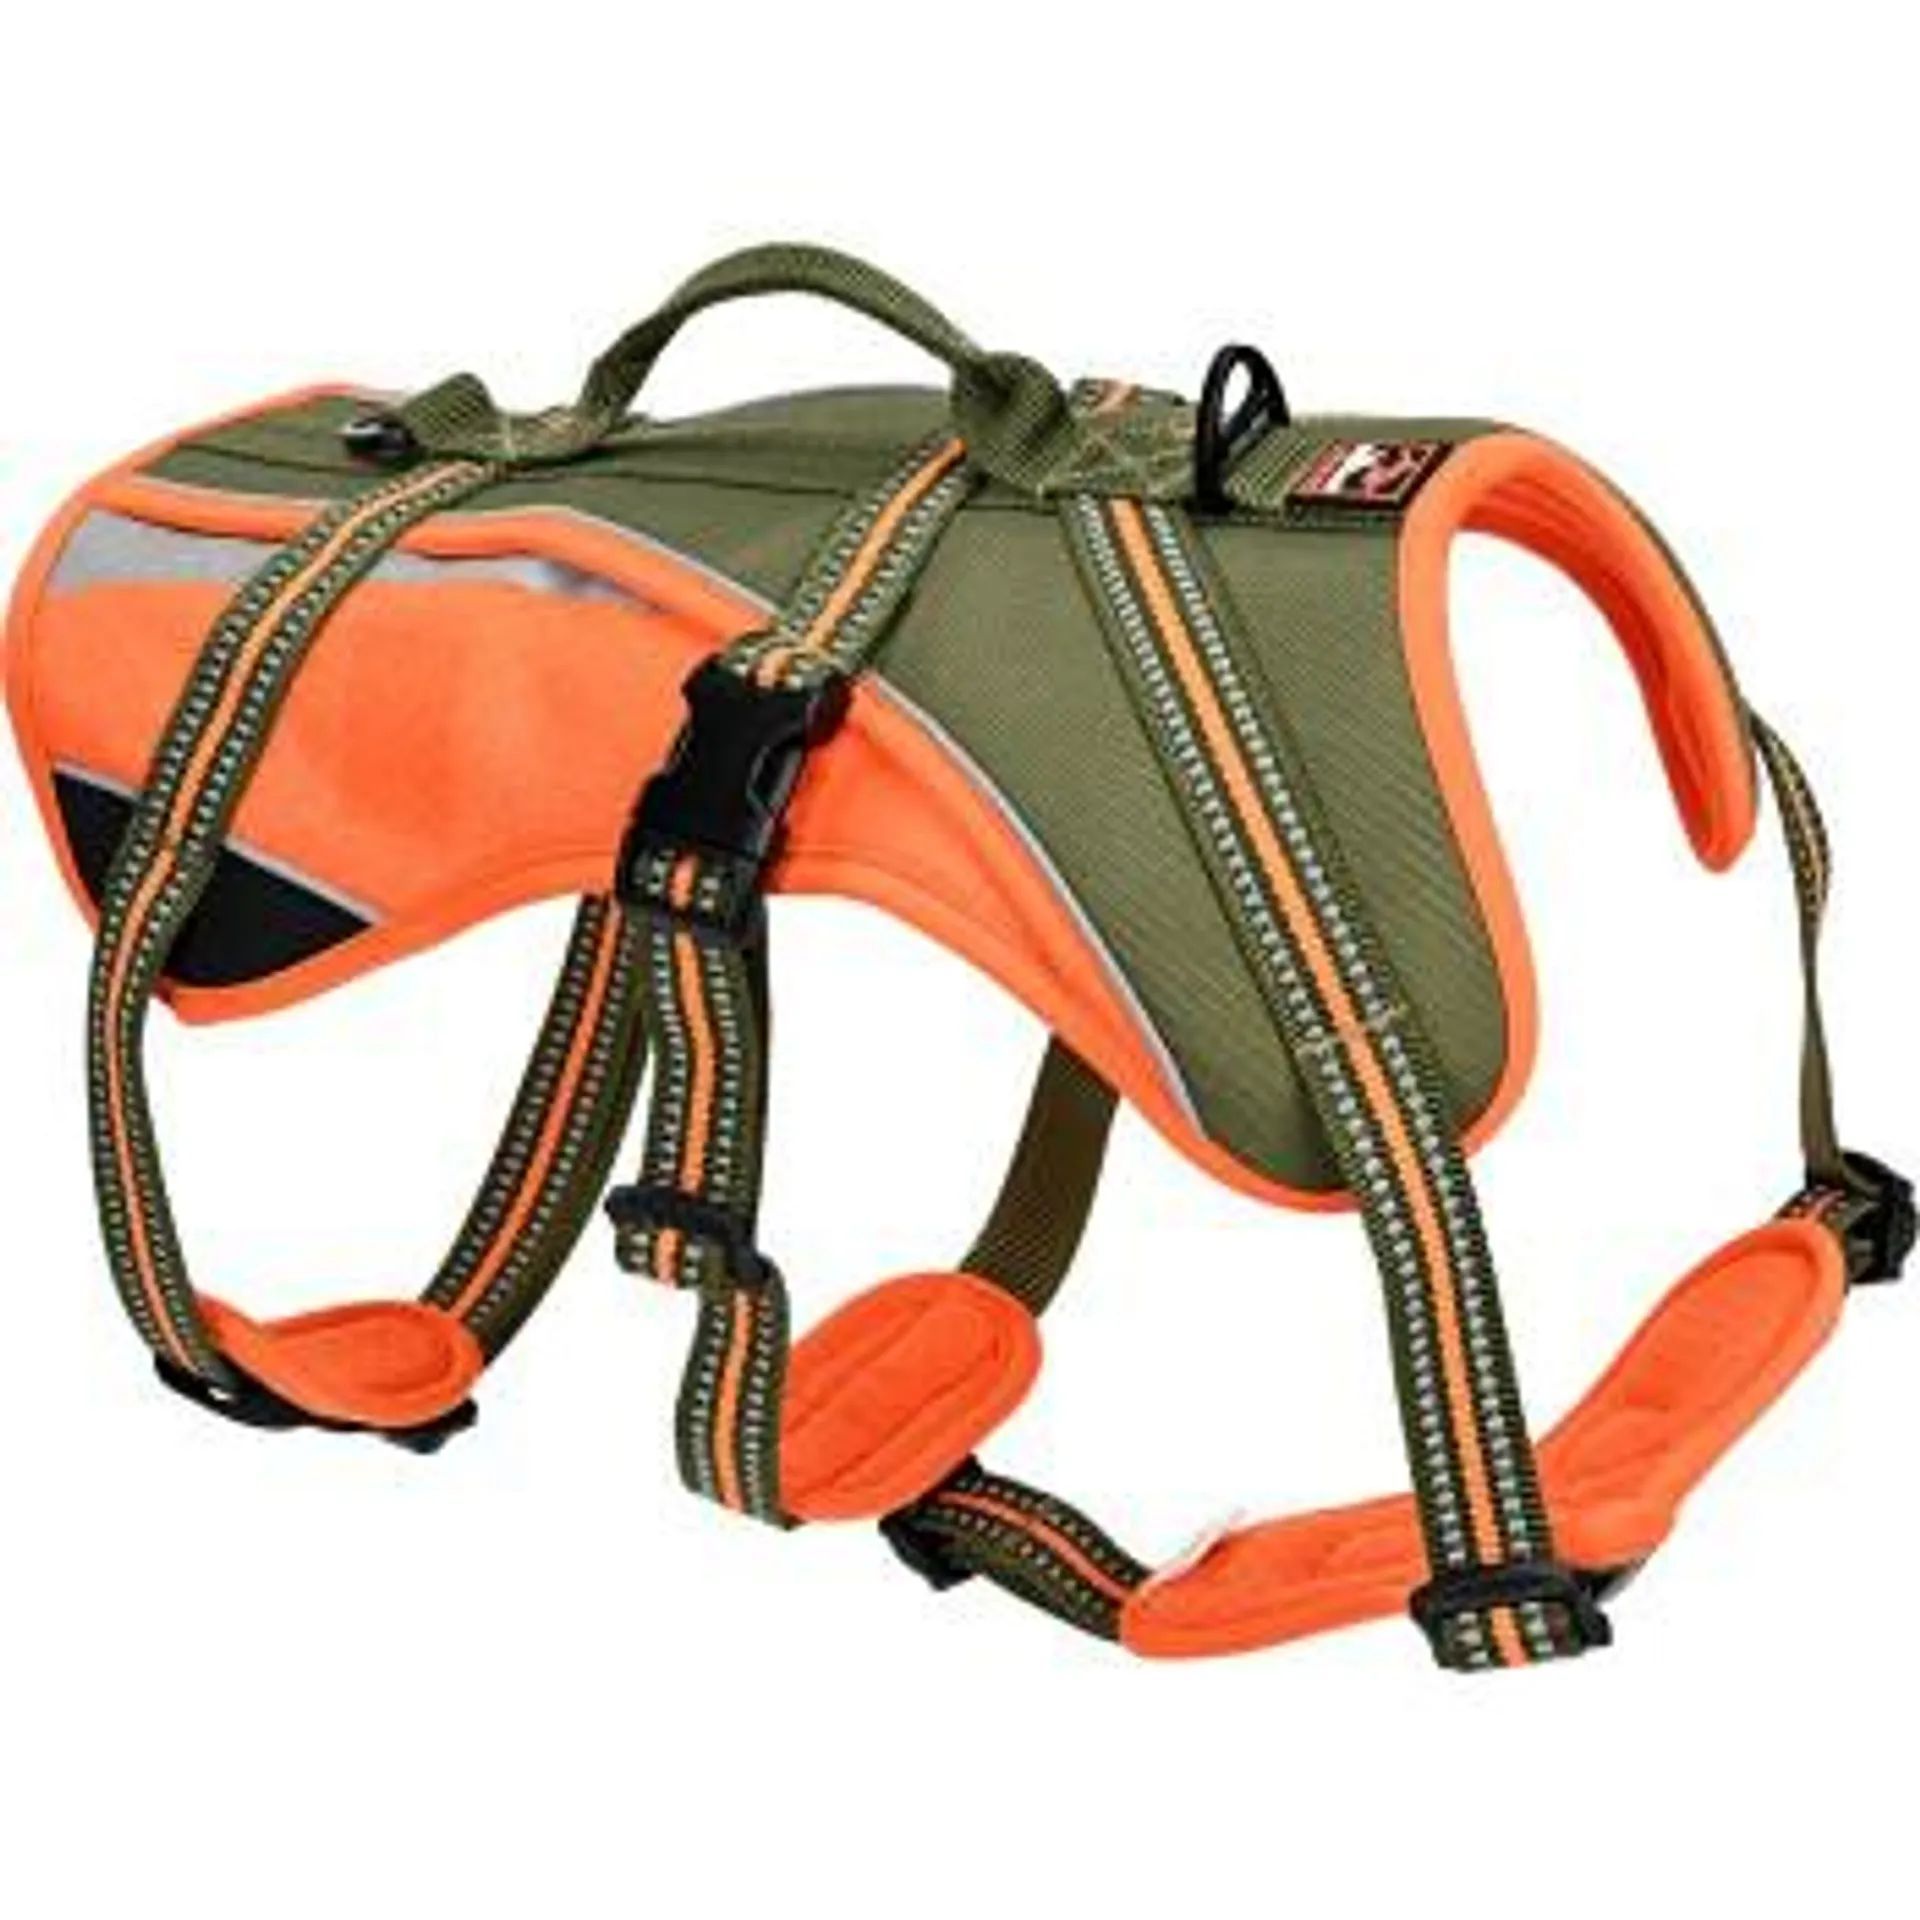 Dogs Creek Safety Harness Revolution S